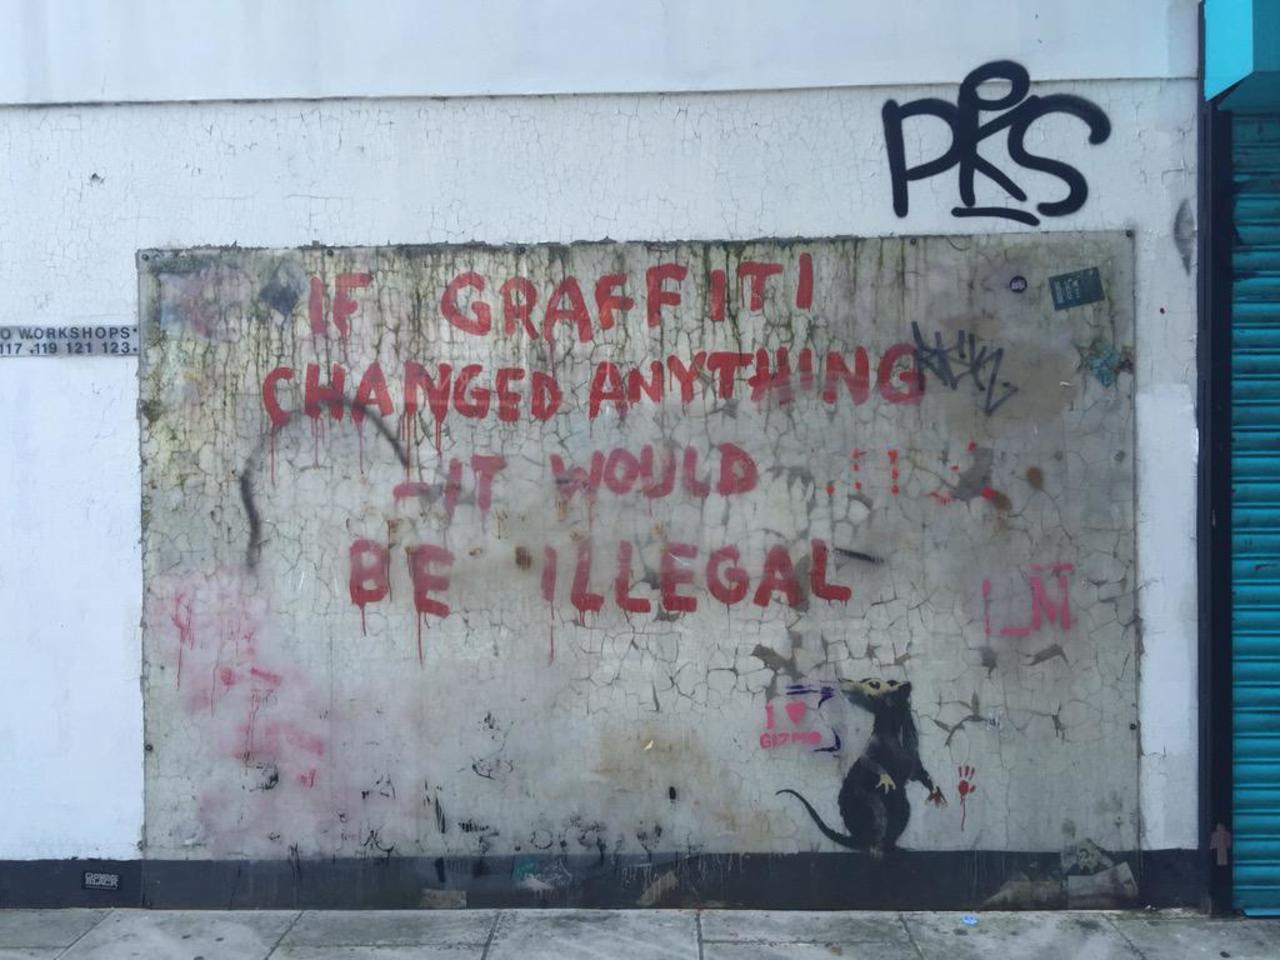 Just discovered an old #Banksy: "if #graffiti changed anything... " #streetart #London http://t.co/TUTNbxTQrC